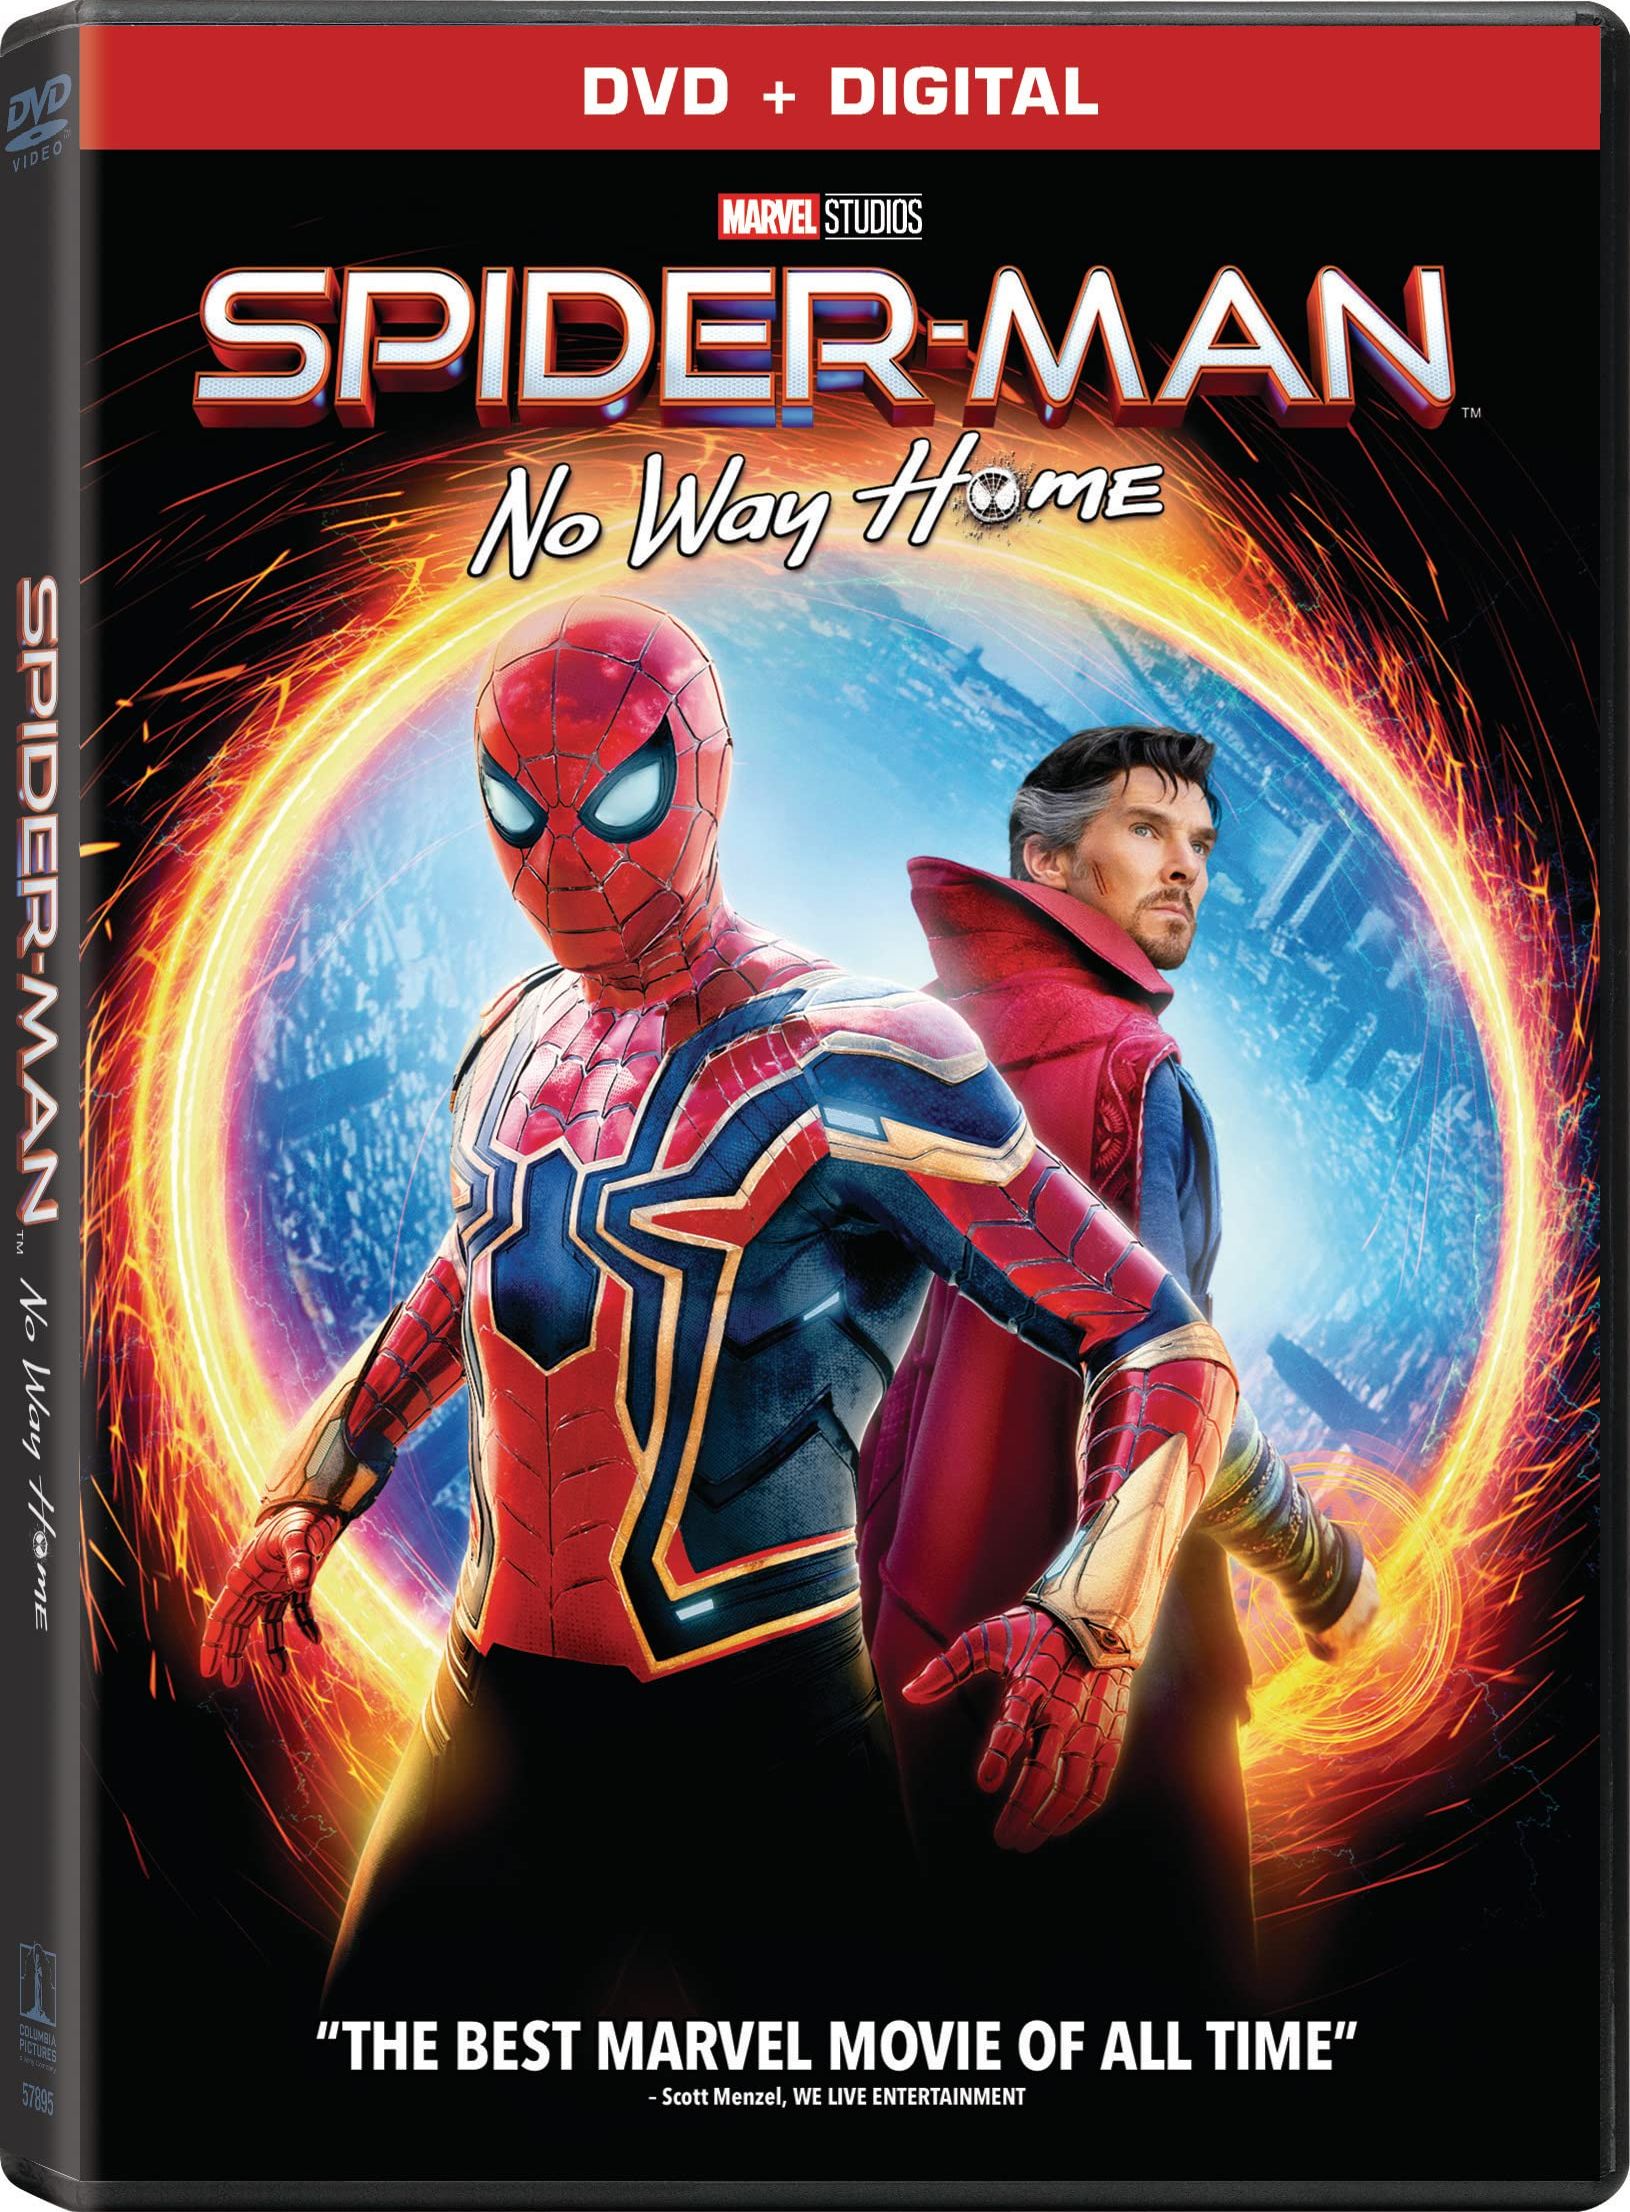 Spider-Man No Way Home DVD Release Date April 12, 2022